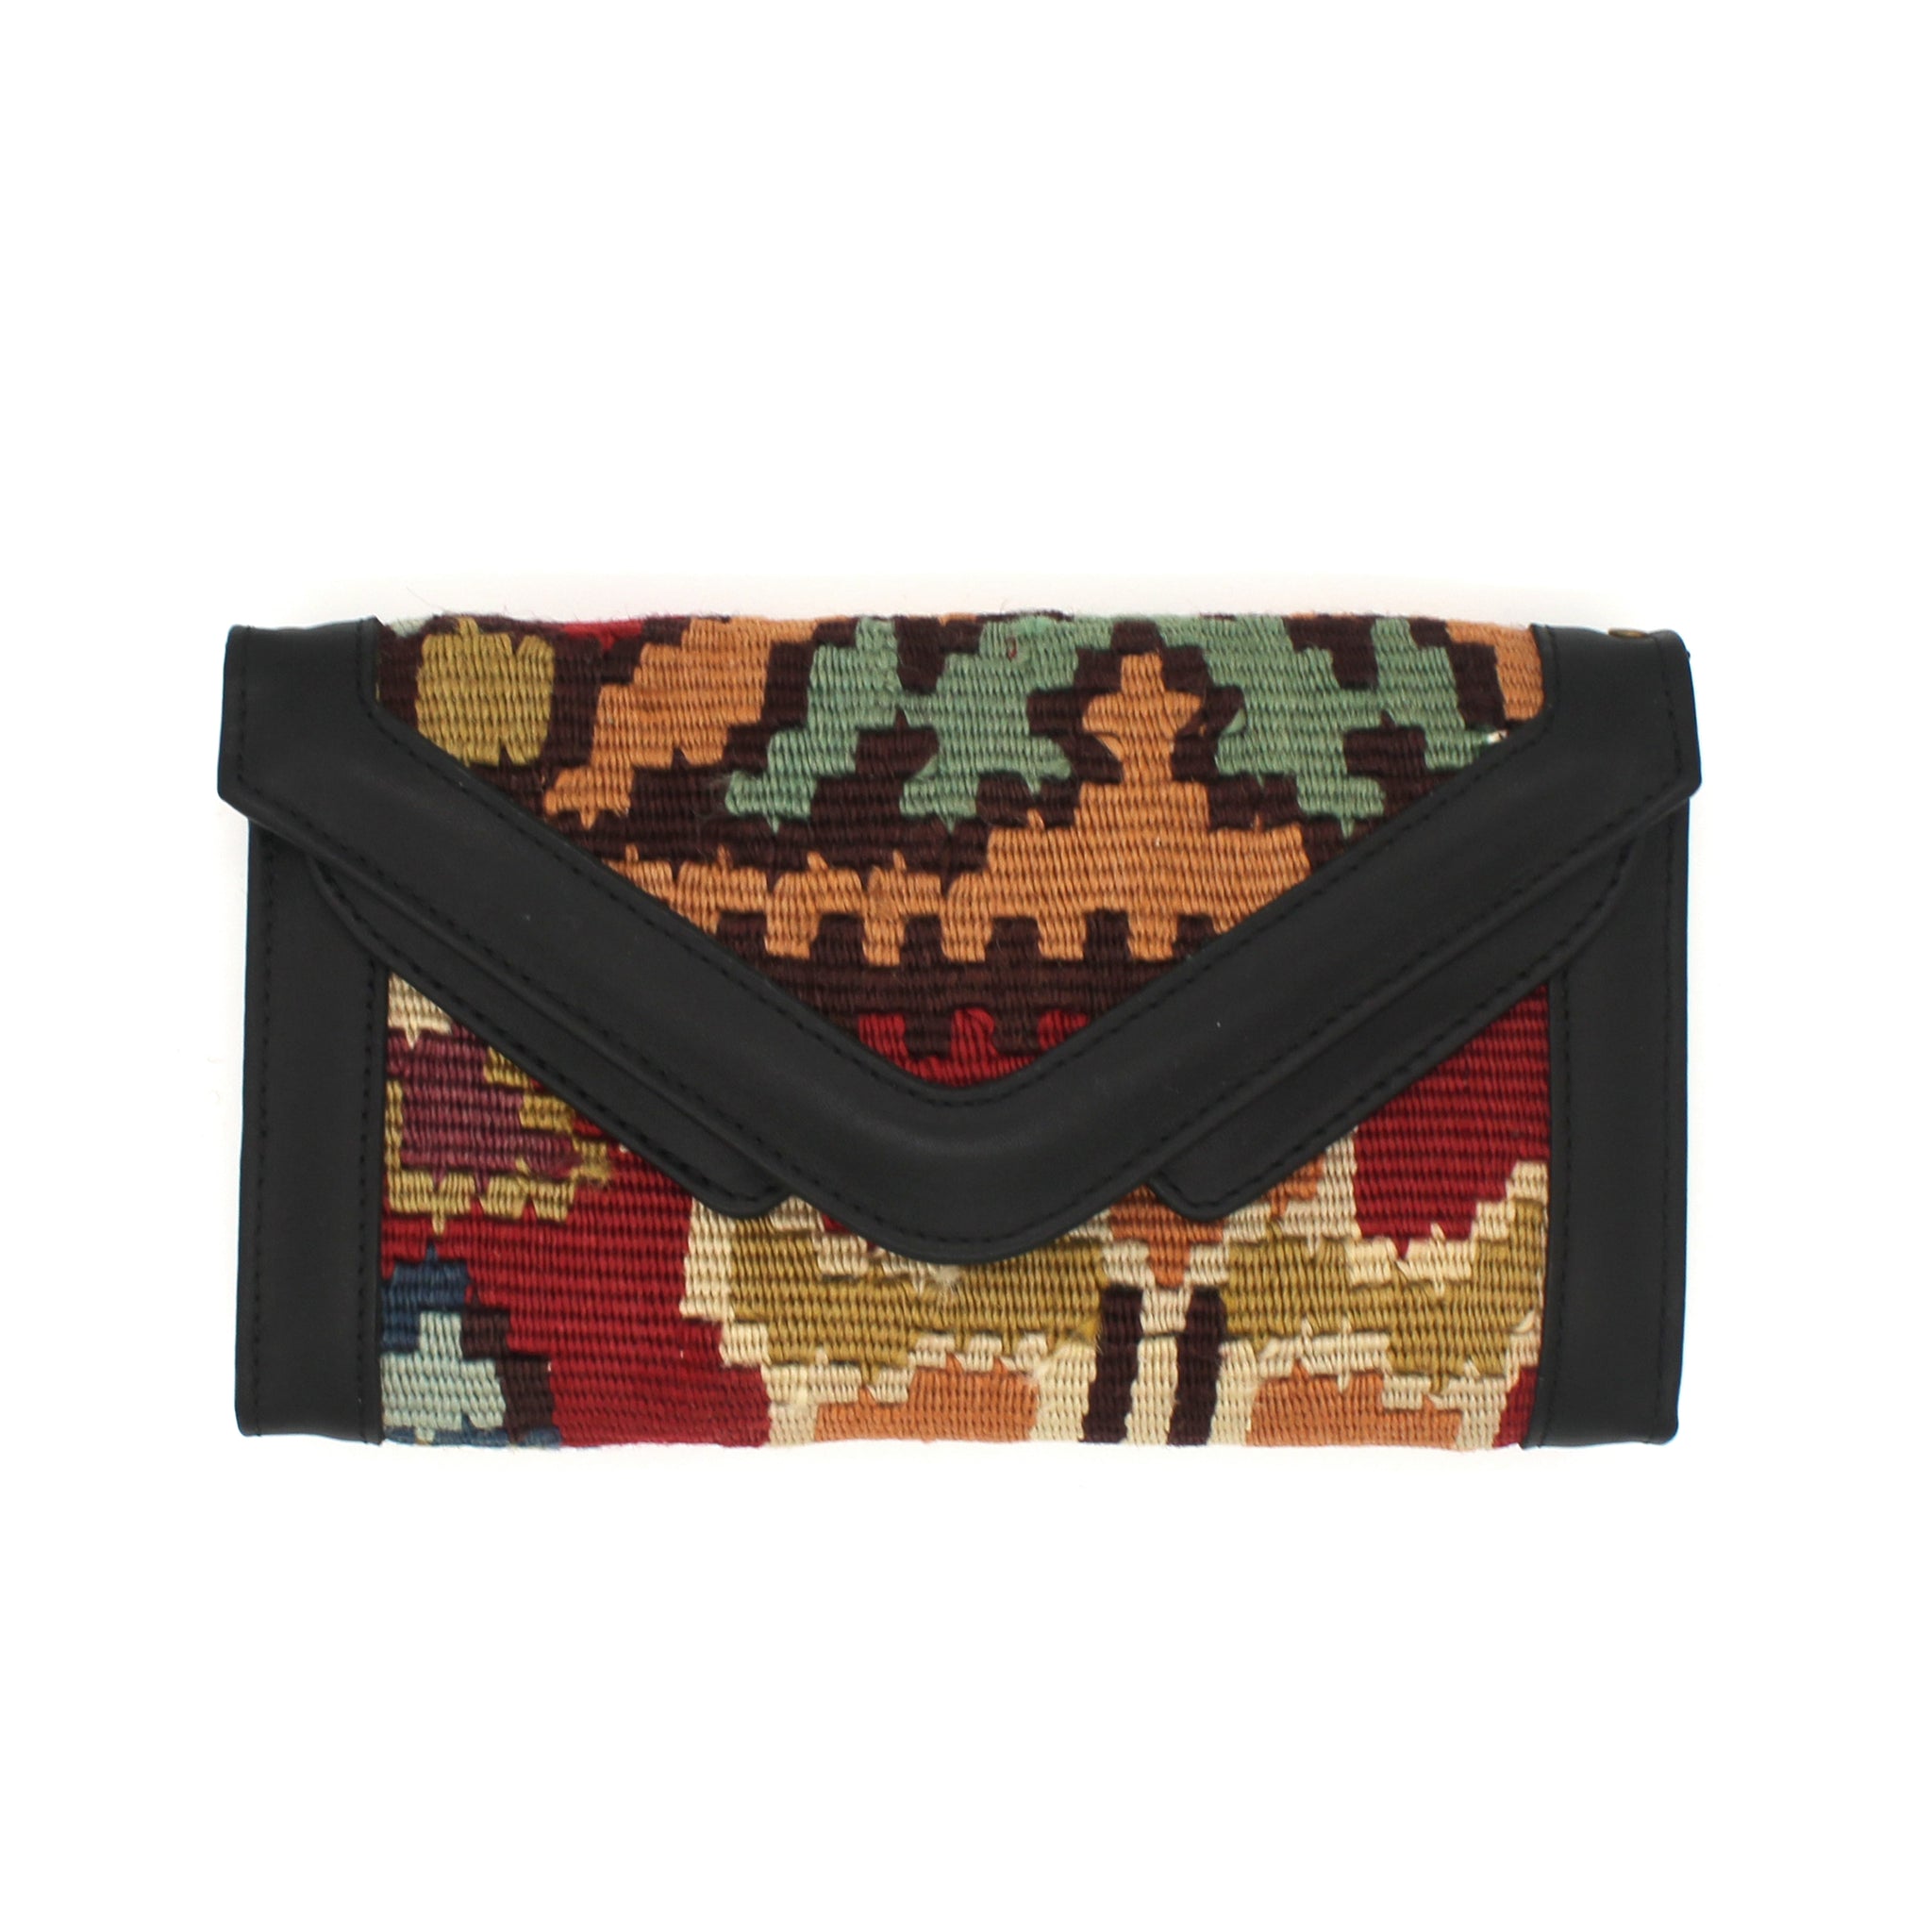 Vintage Rug and Leather Wallet with Strap No. 12